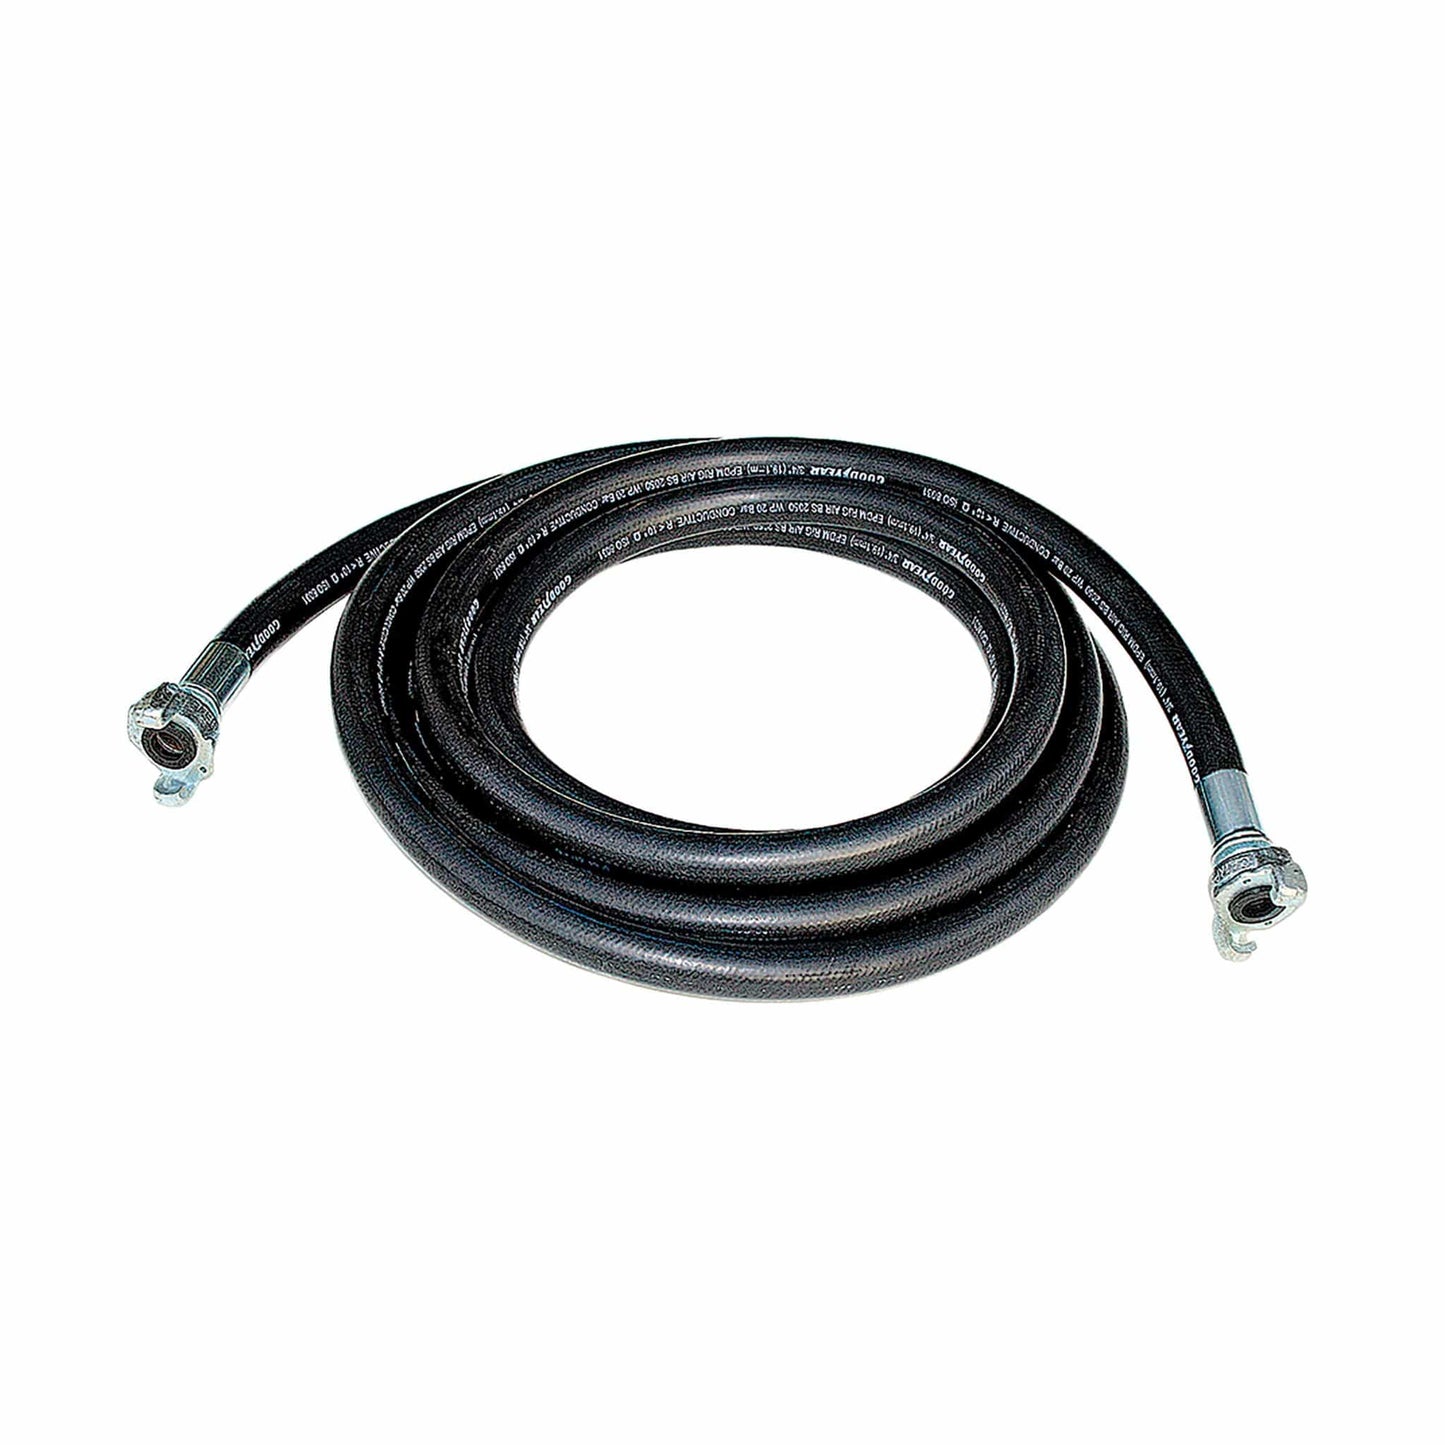 Static Conductive Air Hose Assembly - 3/4" ID x 25'